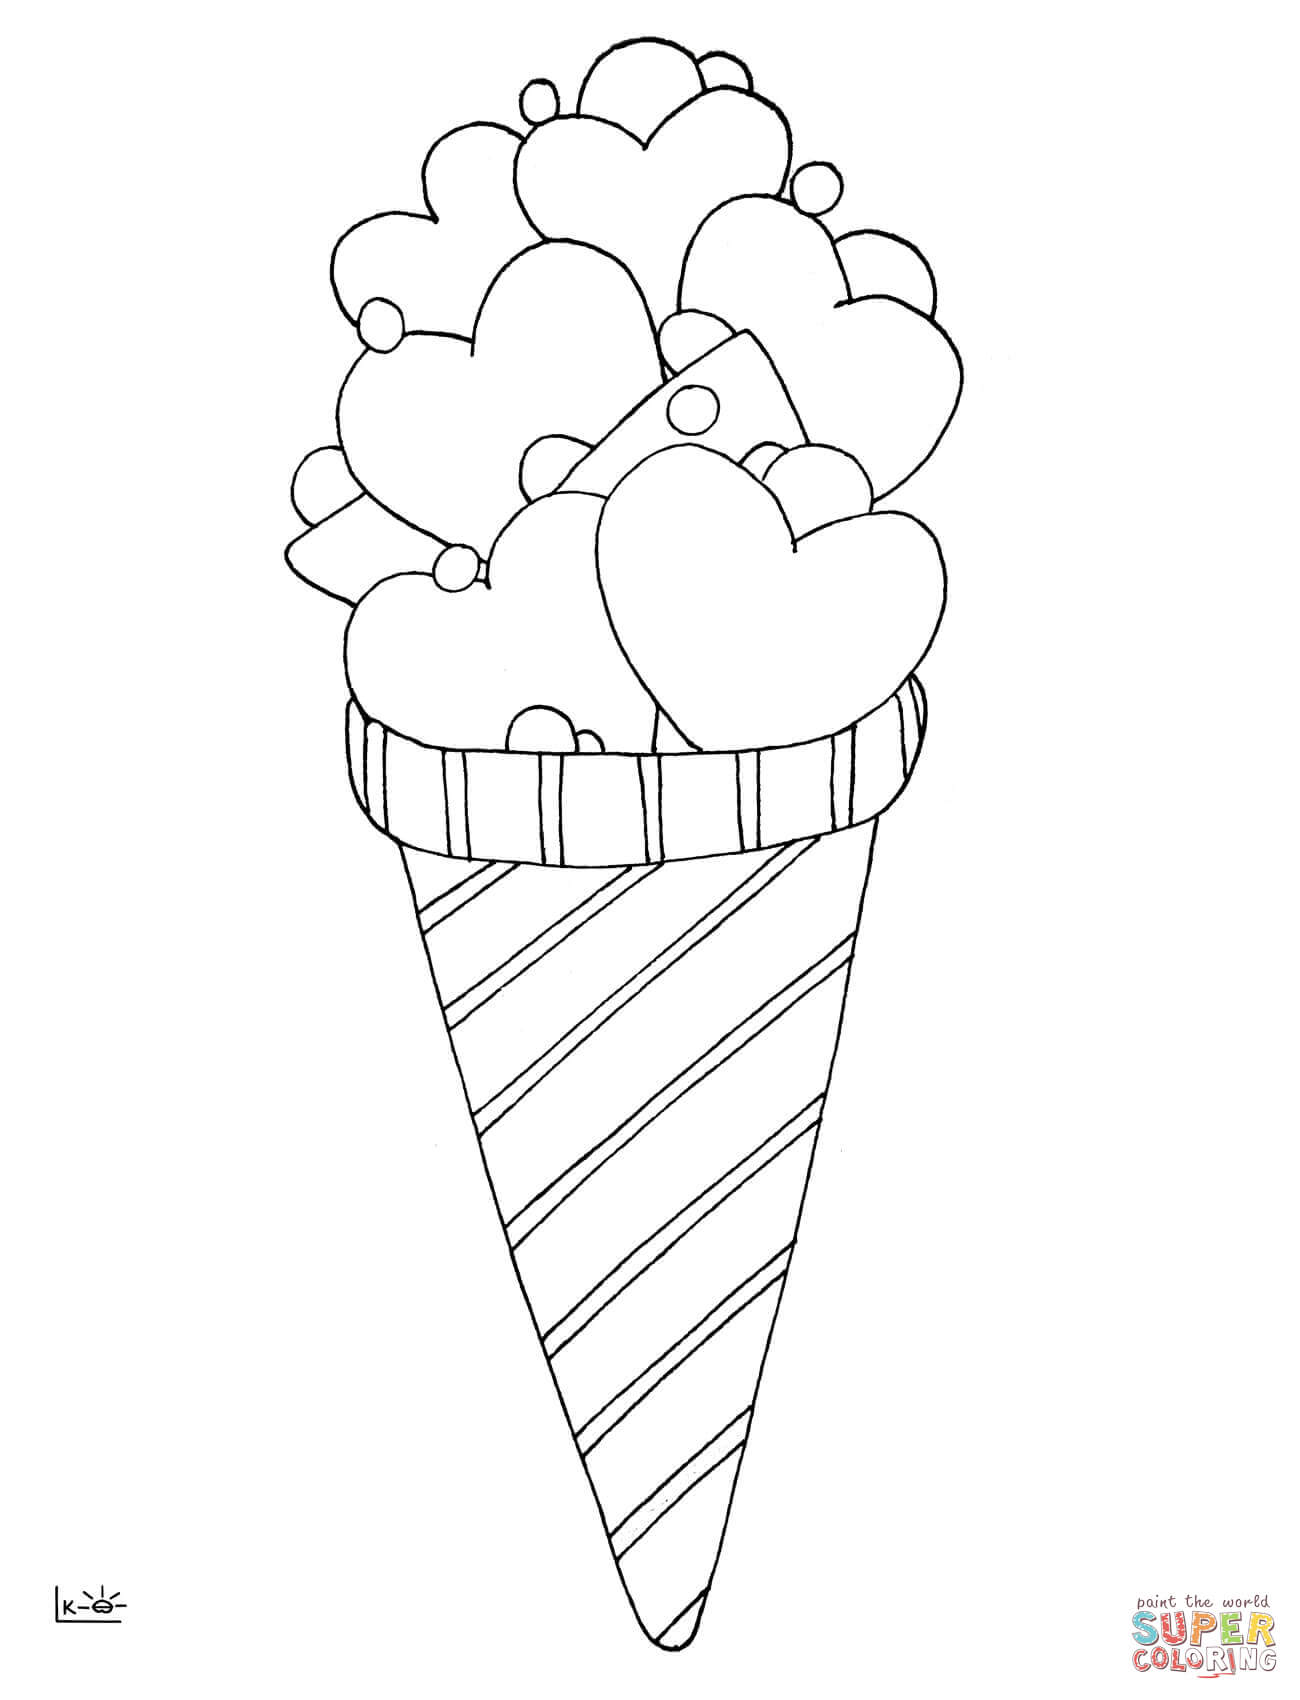 Love Ice Cream coloring page | Free Printable Coloring Pages